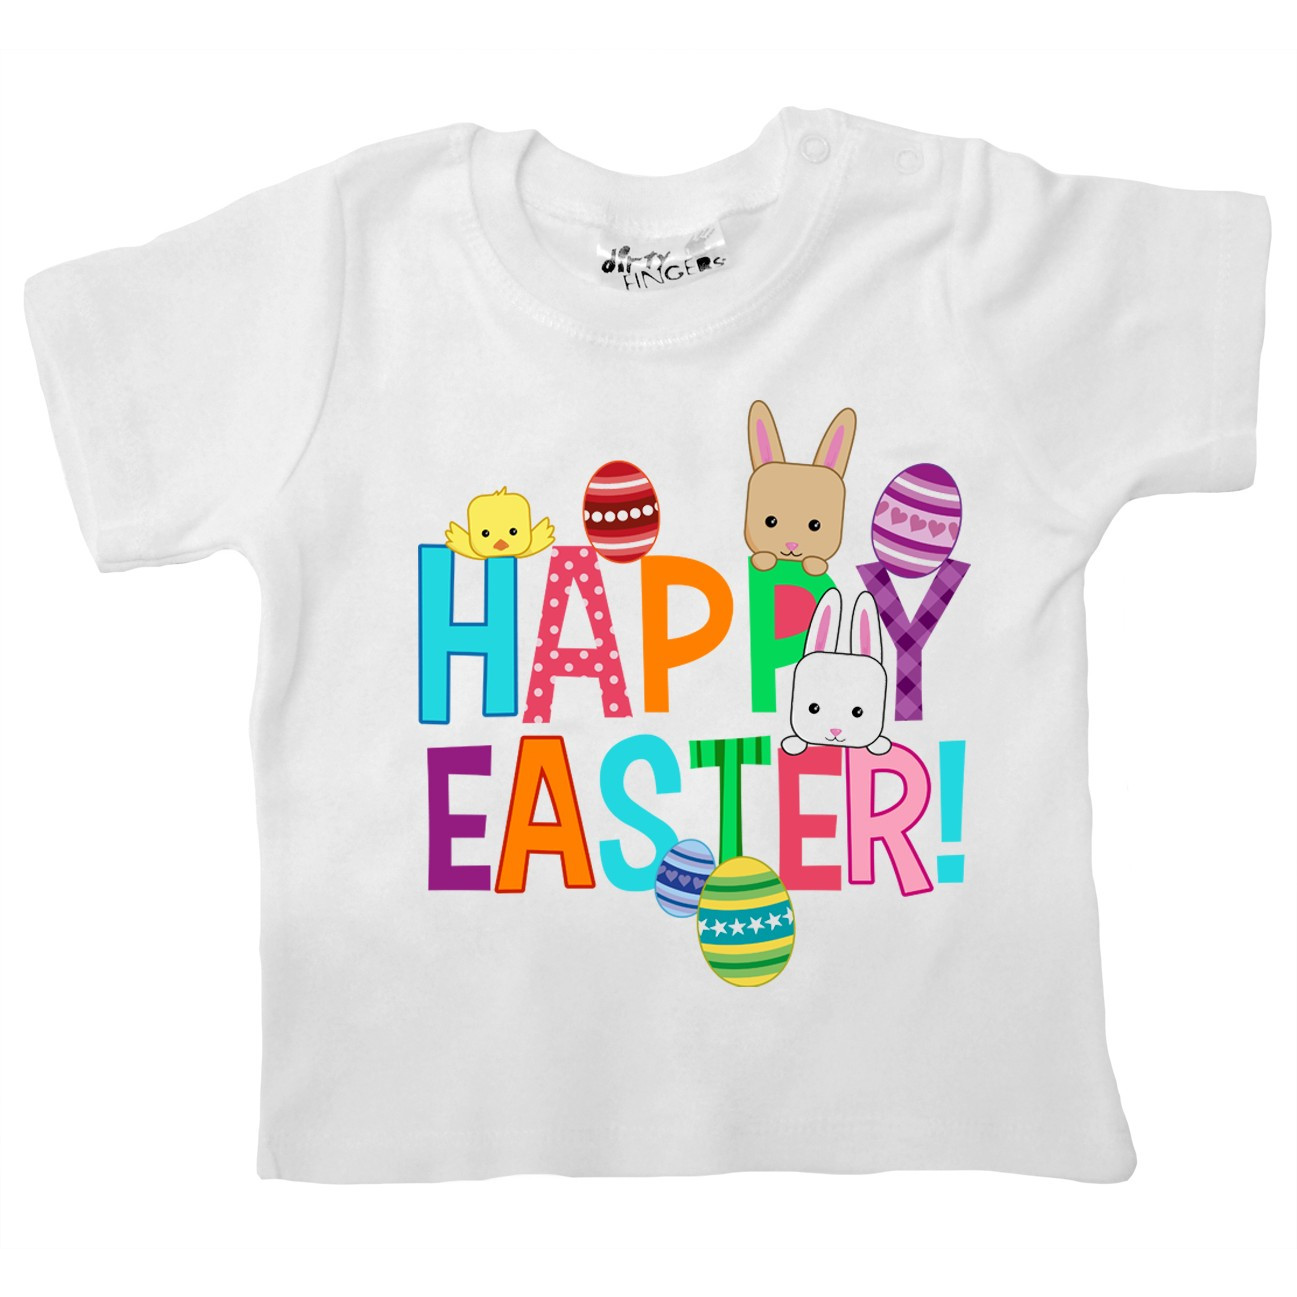 Easter Shirt Ideas
 Happy Easter T shirt & Rompers